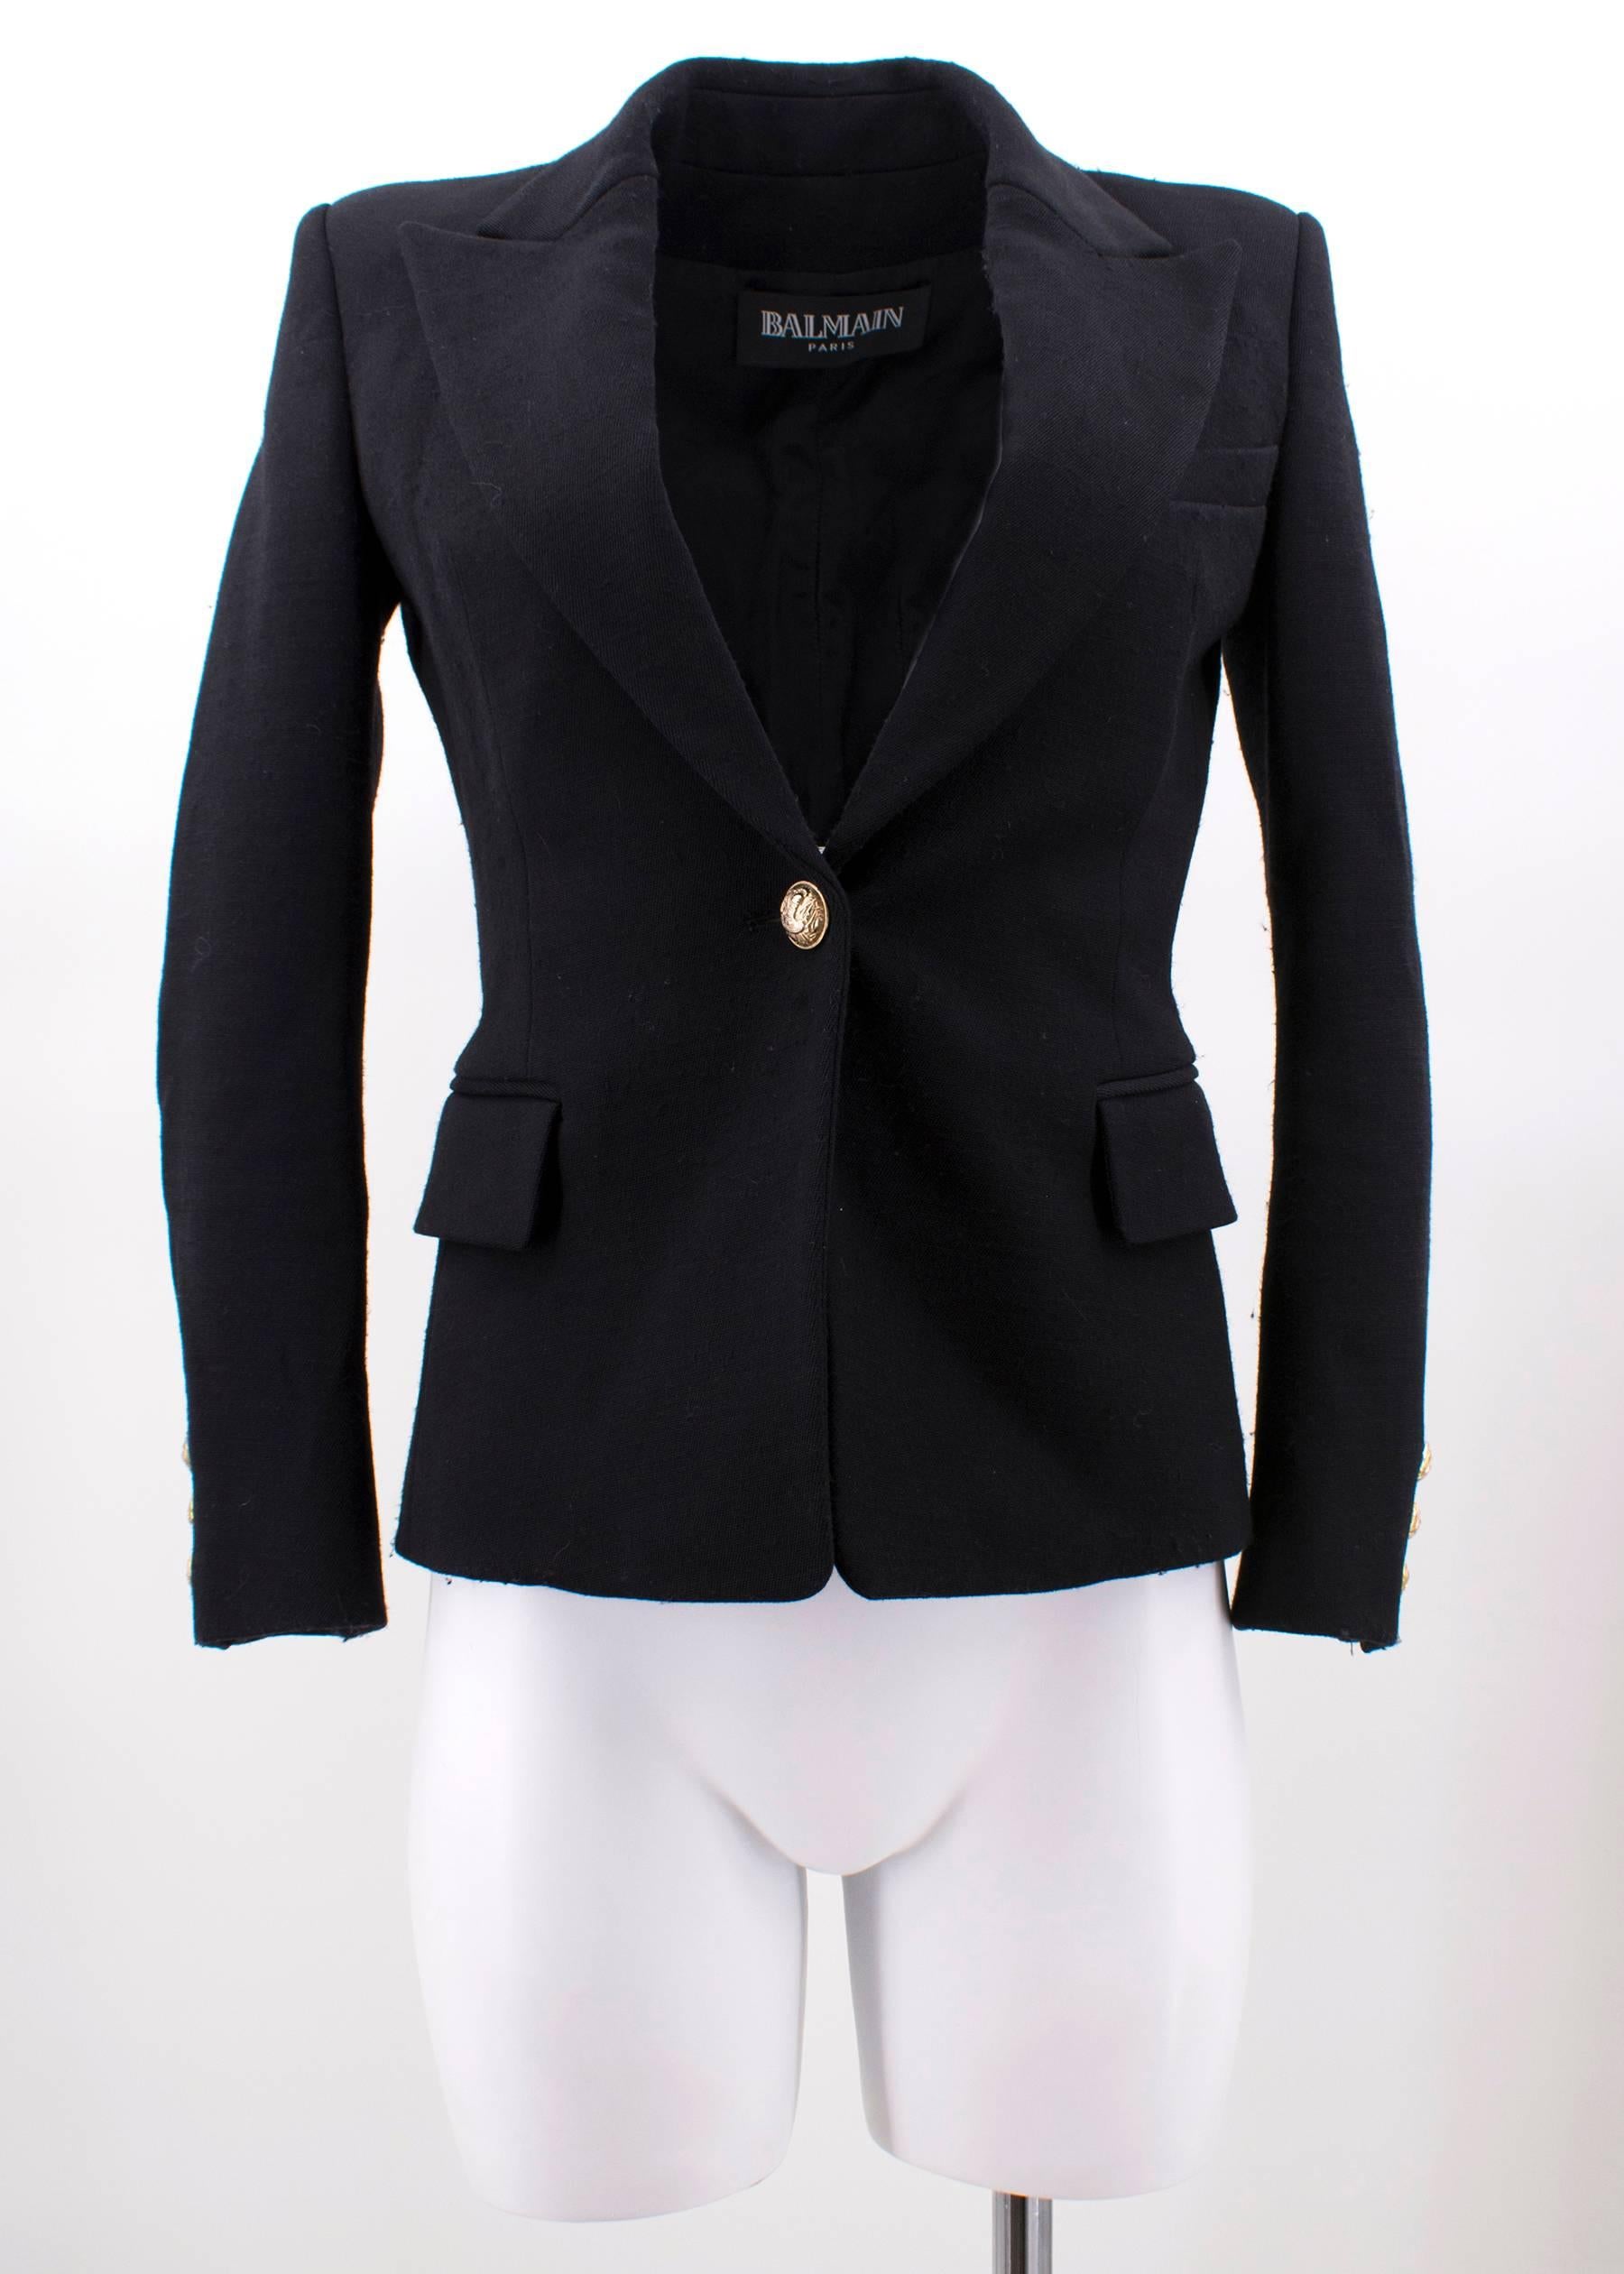 Balmain black wool blazer featuring padded shoulders, one button fastening through front, two flap pockets, one slit pocket and gold-tone embossed button.

Fabrics: 96% Wool, 2% Elastan and 2% Polyamide.

Approx Measurements: 
Shoulders- 38cm